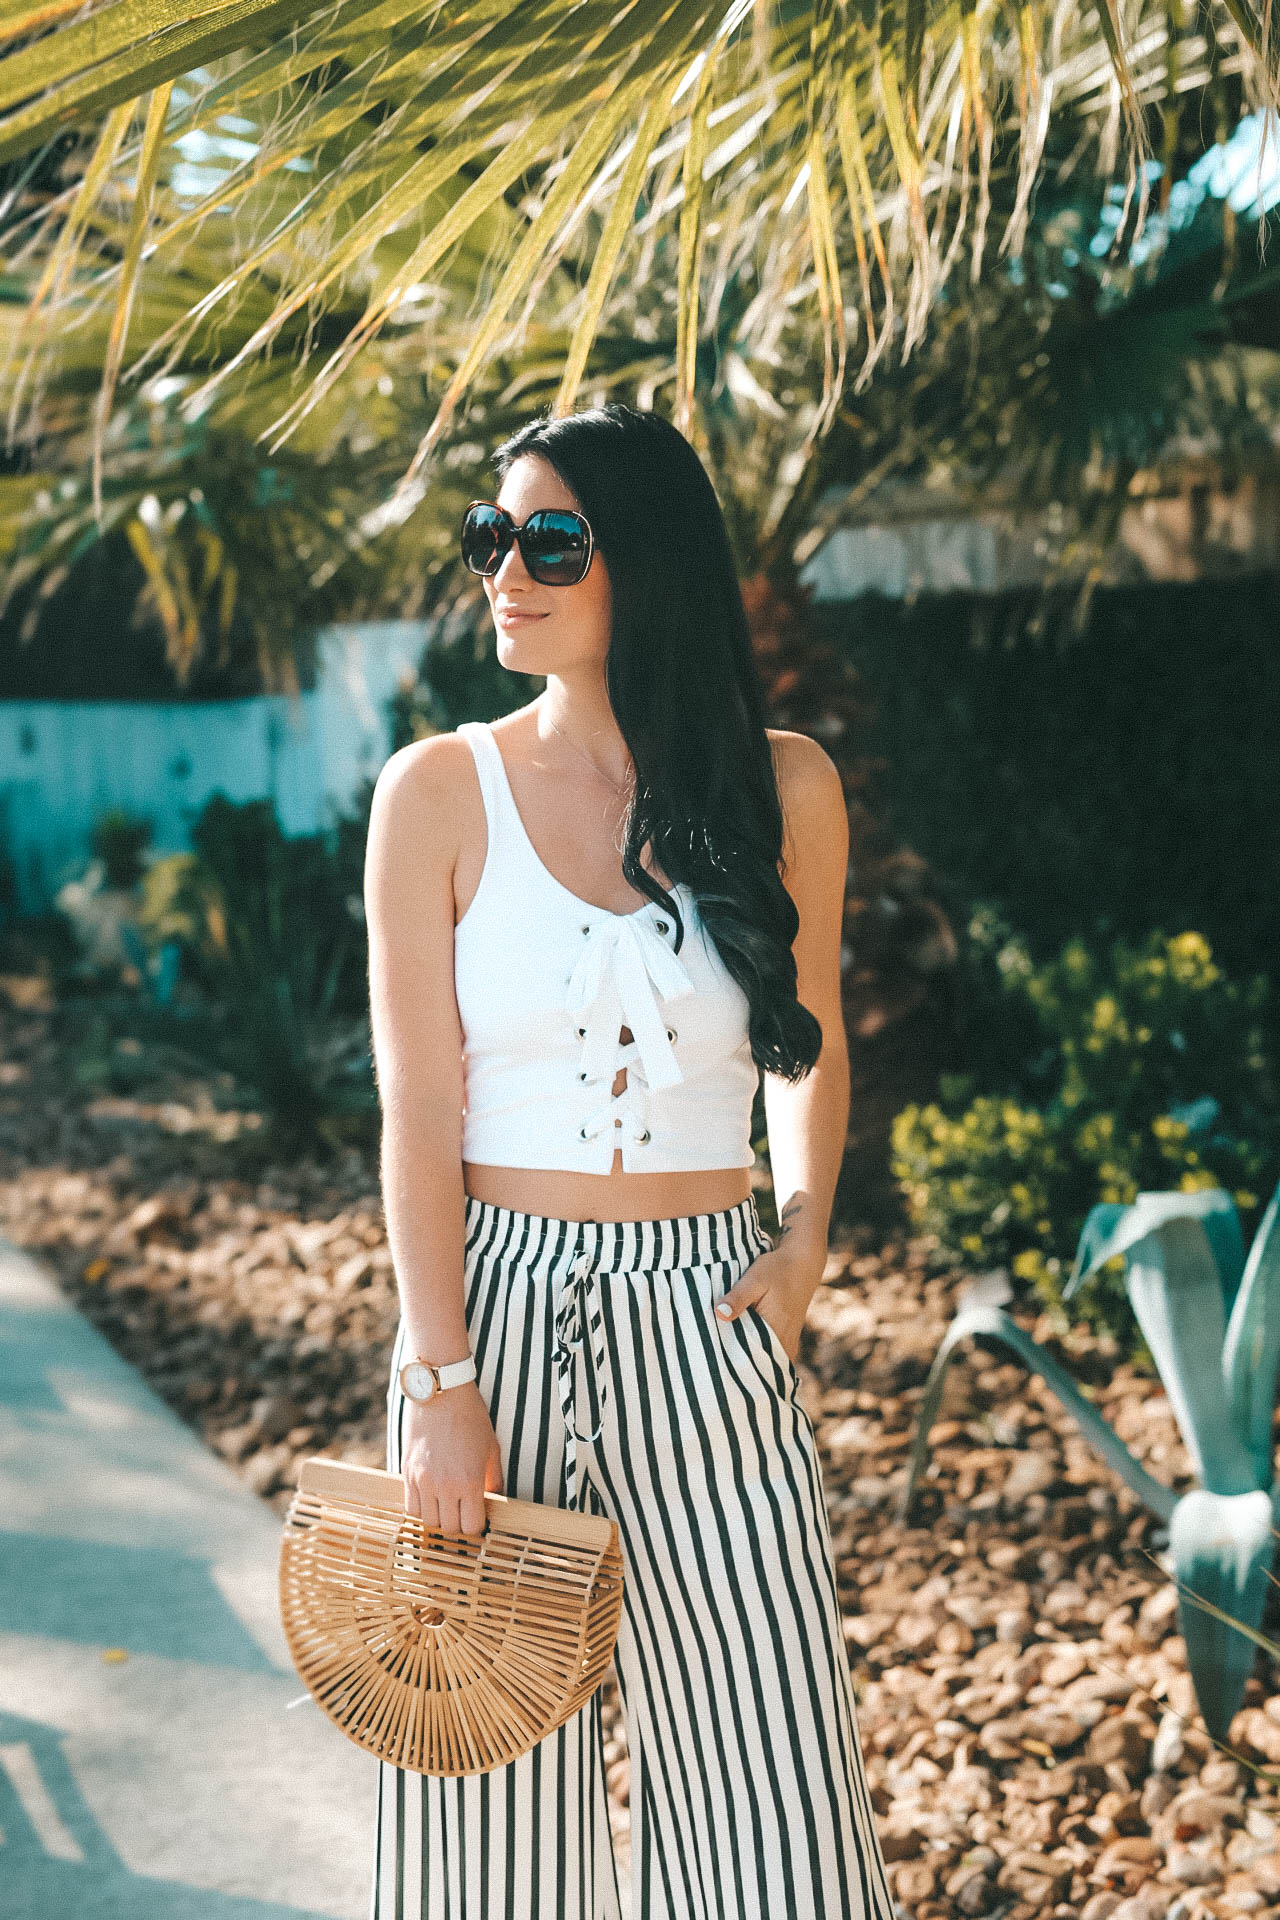 How to Style Striped Wide Leg Pants for Summer | summer pants | striped pants outfit | summer outfit ideas || Dressed to Kill #style #fashion #womensoutfits #stripedpants #summerstyle